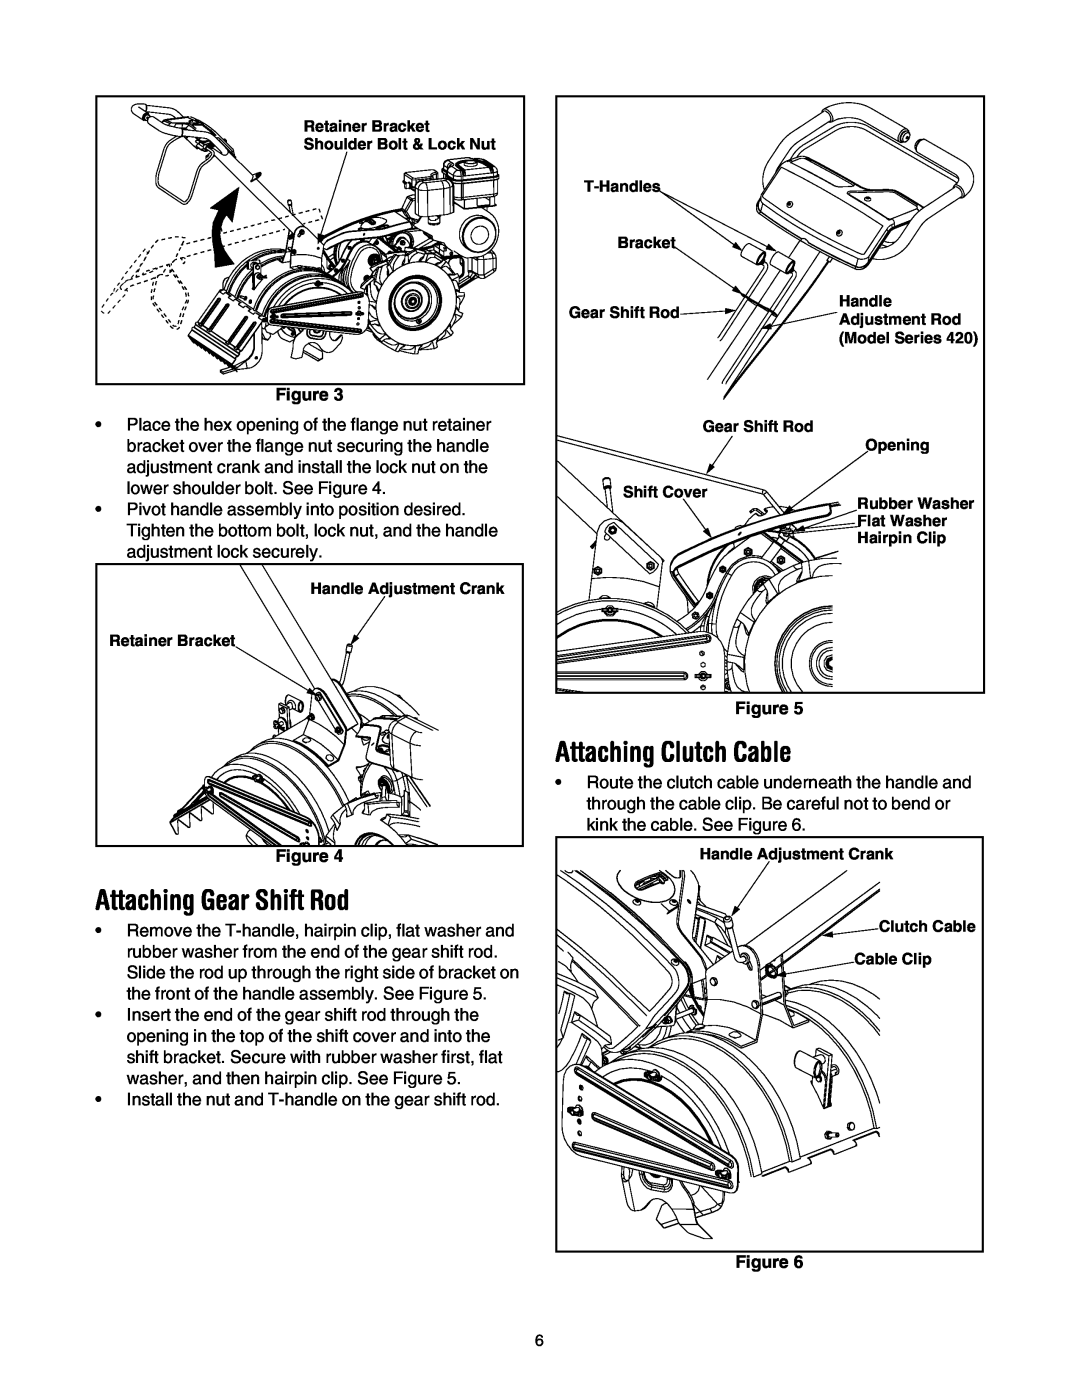 MTD 428C manual Attaching Gear Shift Rod, Attaching Clutch Cable 